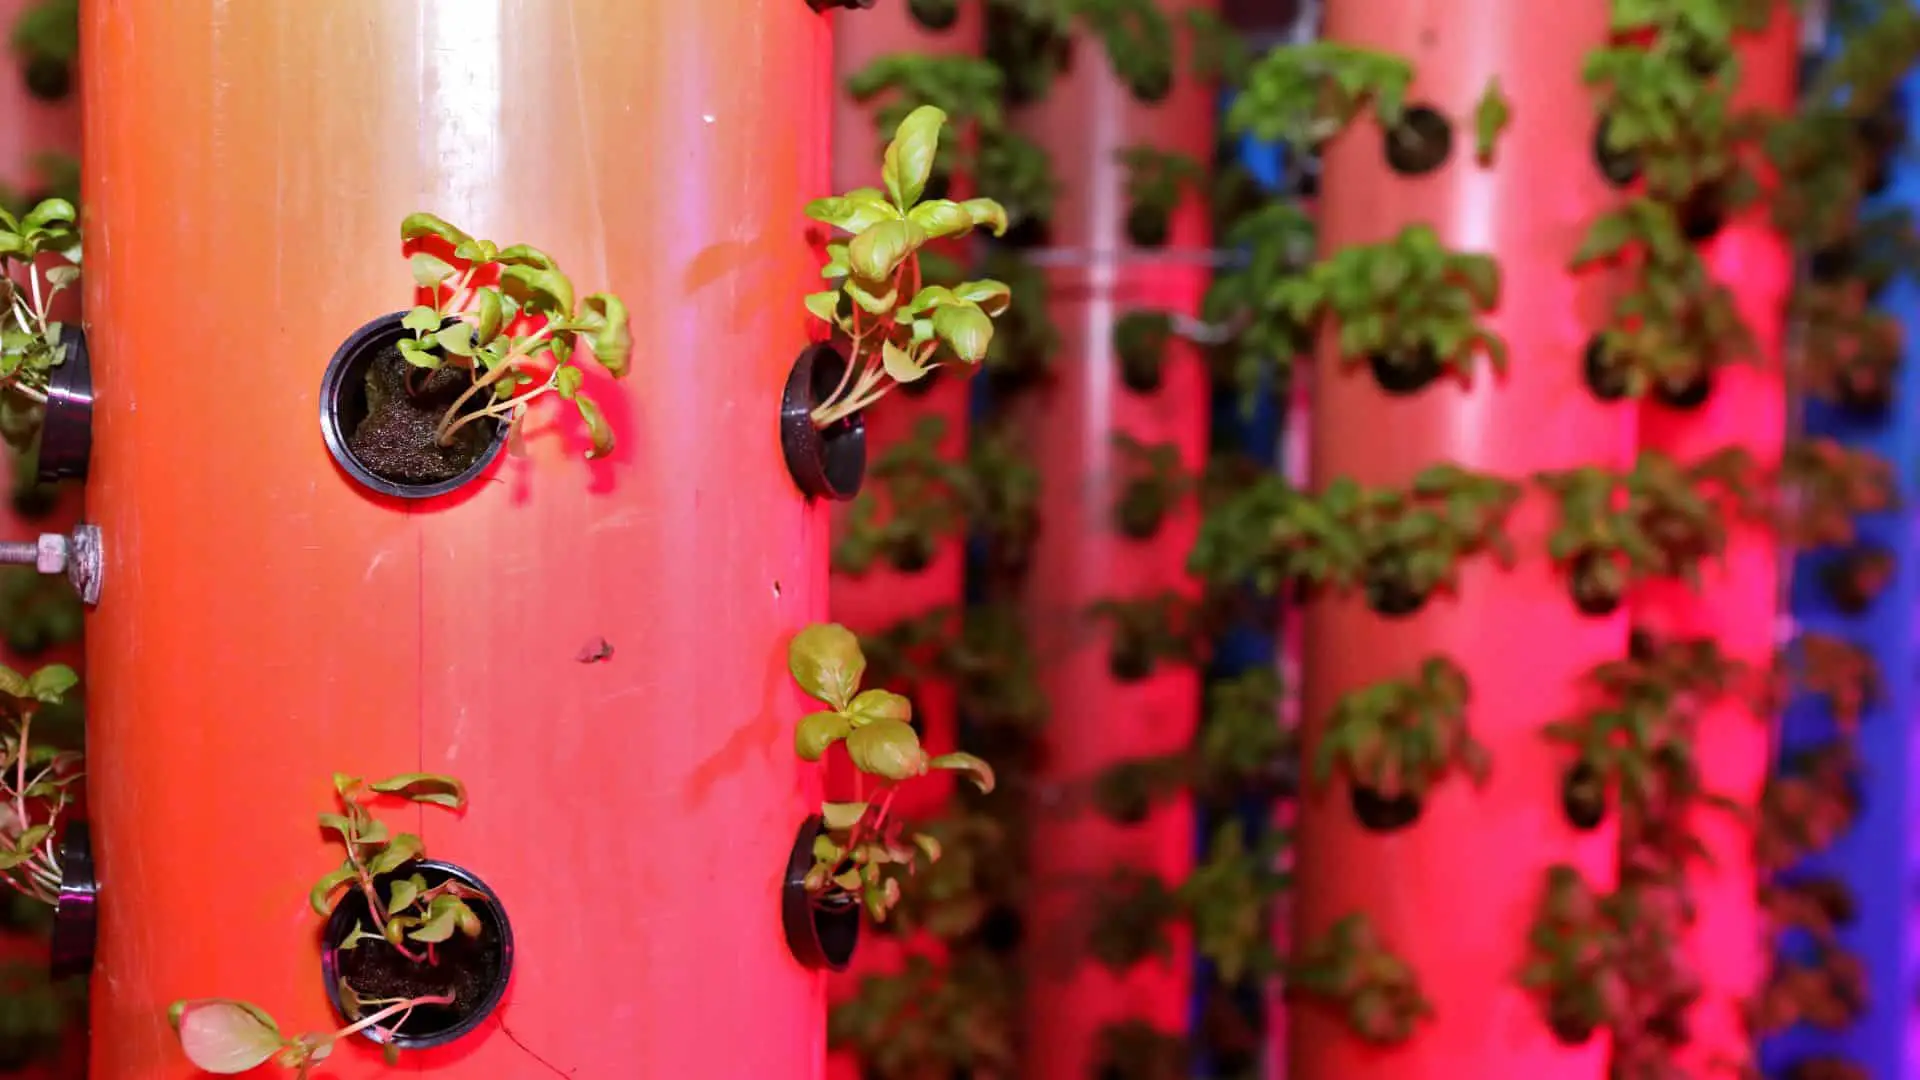 % Ready to revolutionize the way you grow plants? This beginner’s guide will show you how to set up your own aeroponics system, so you can enjoy all of the benefits associated with this innovative technology.